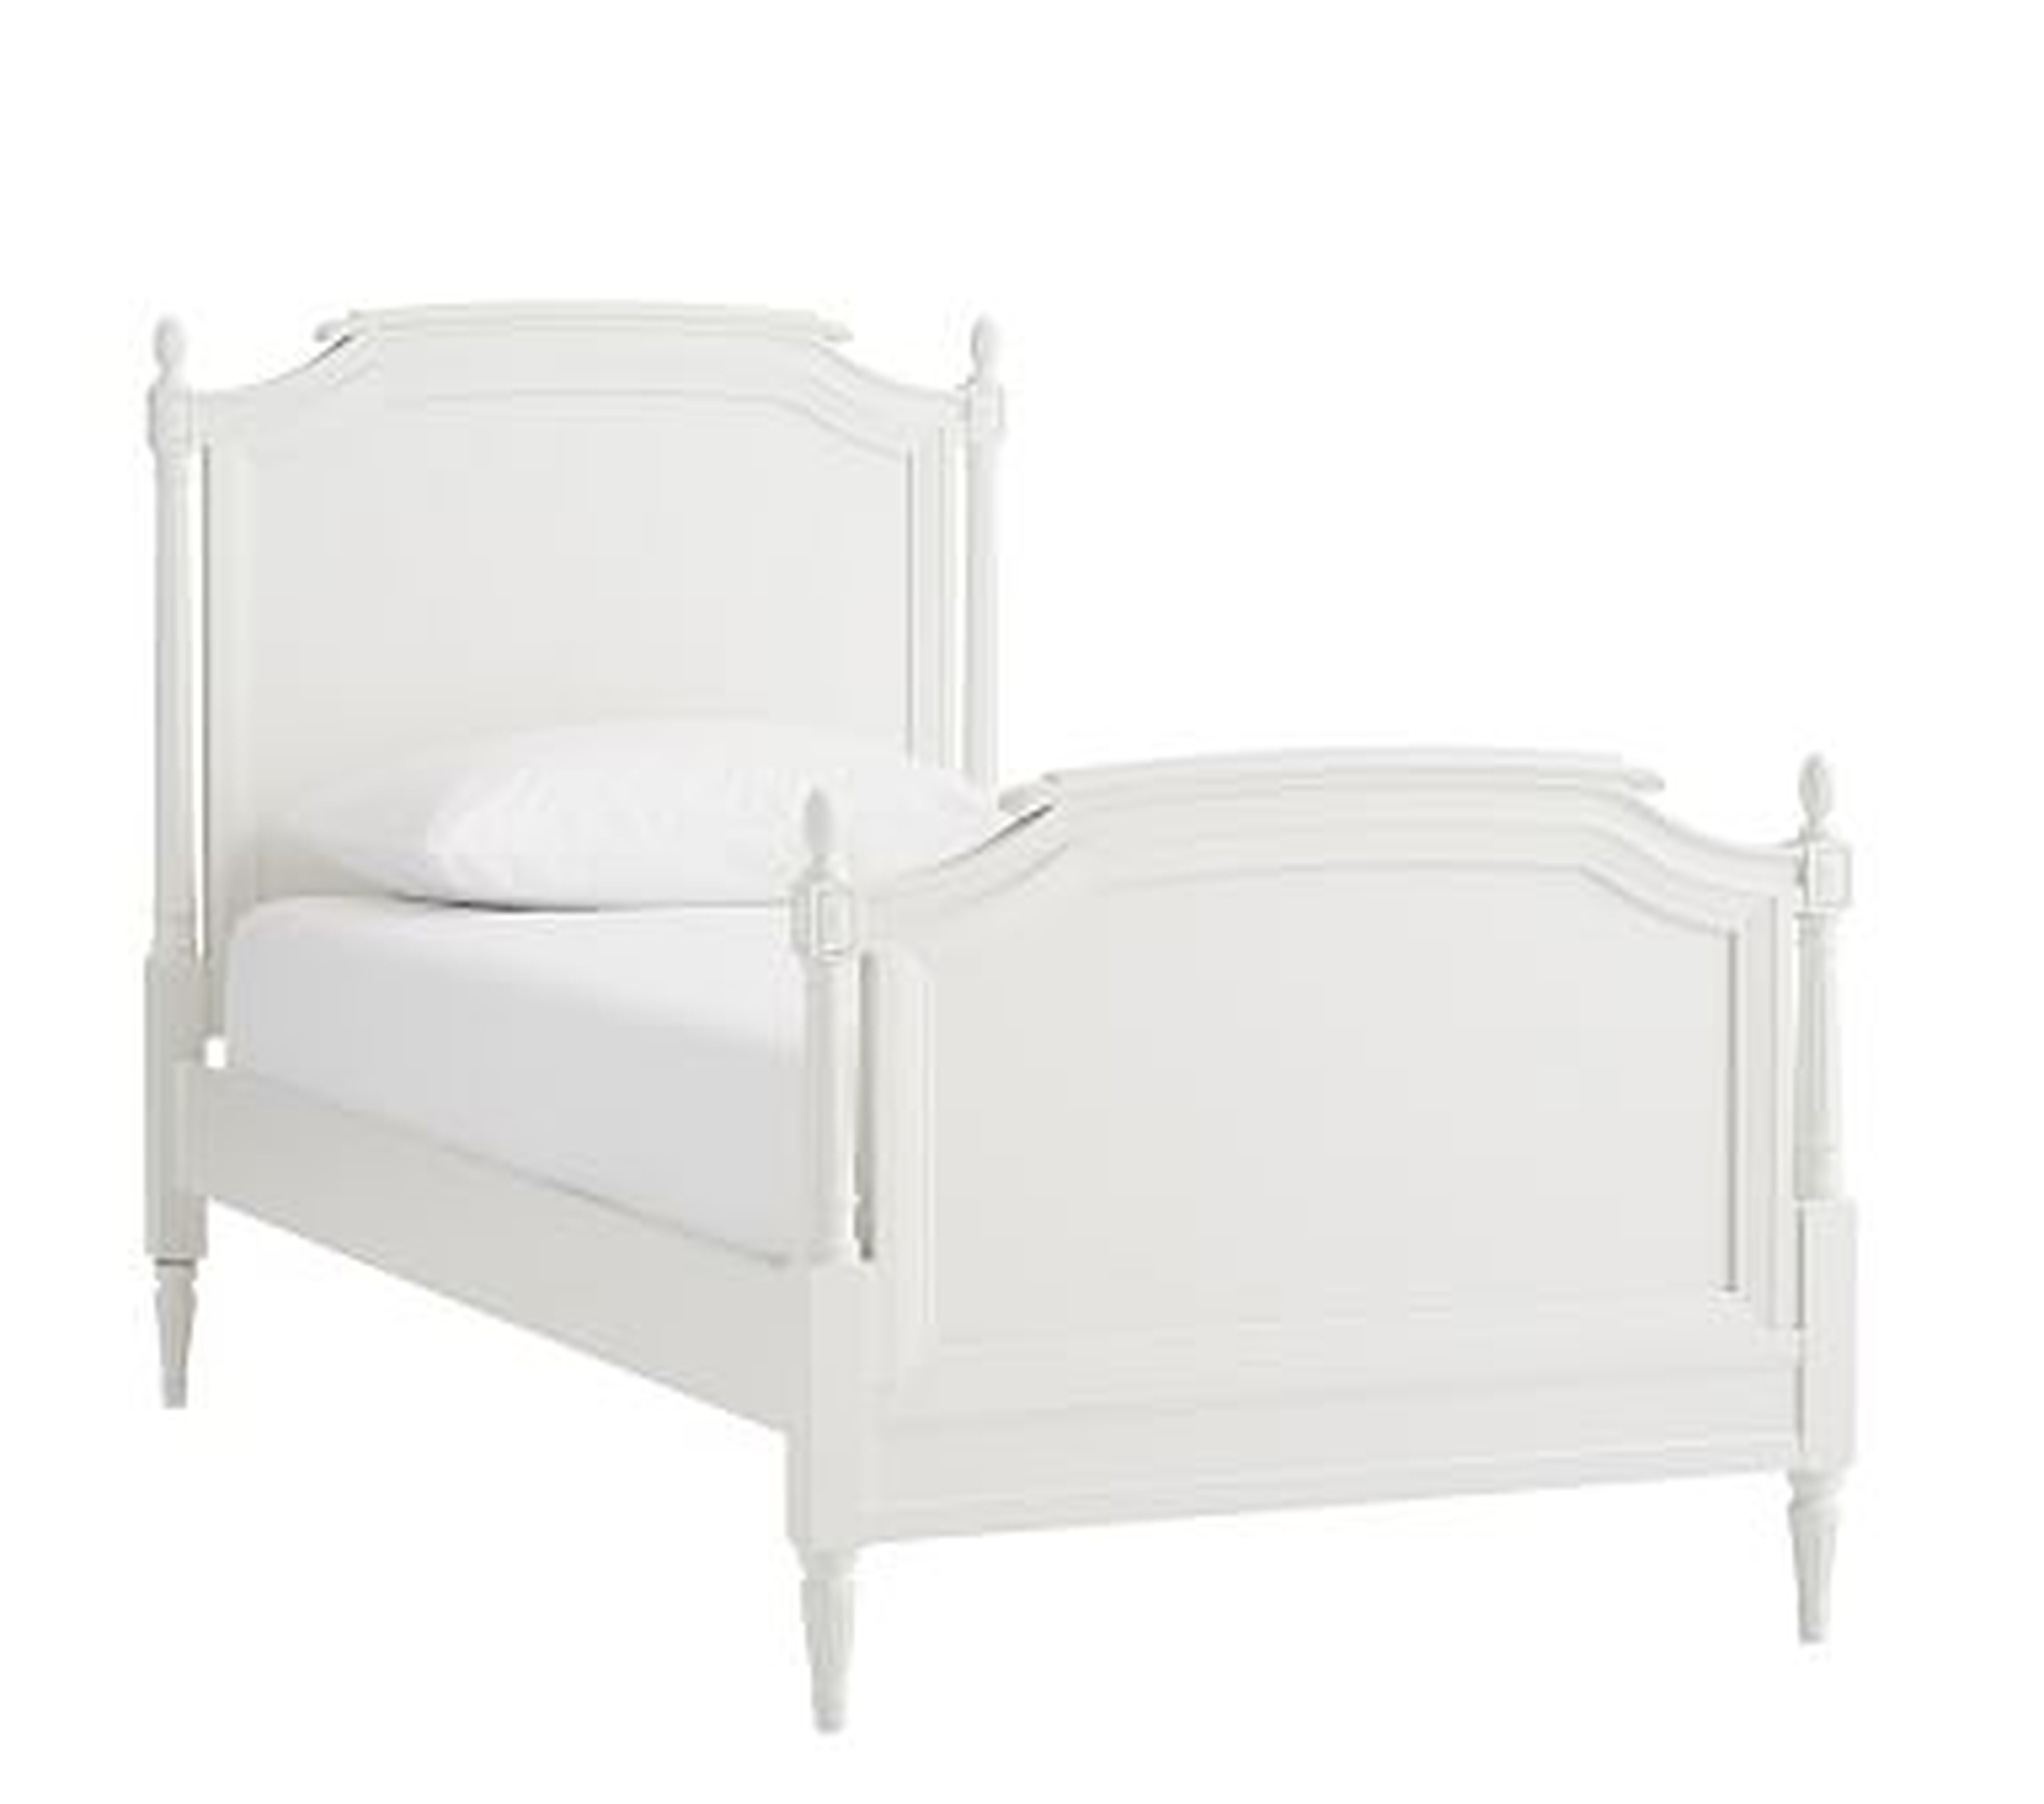 Blythe Bed, Twin, French White - Pottery Barn Kids